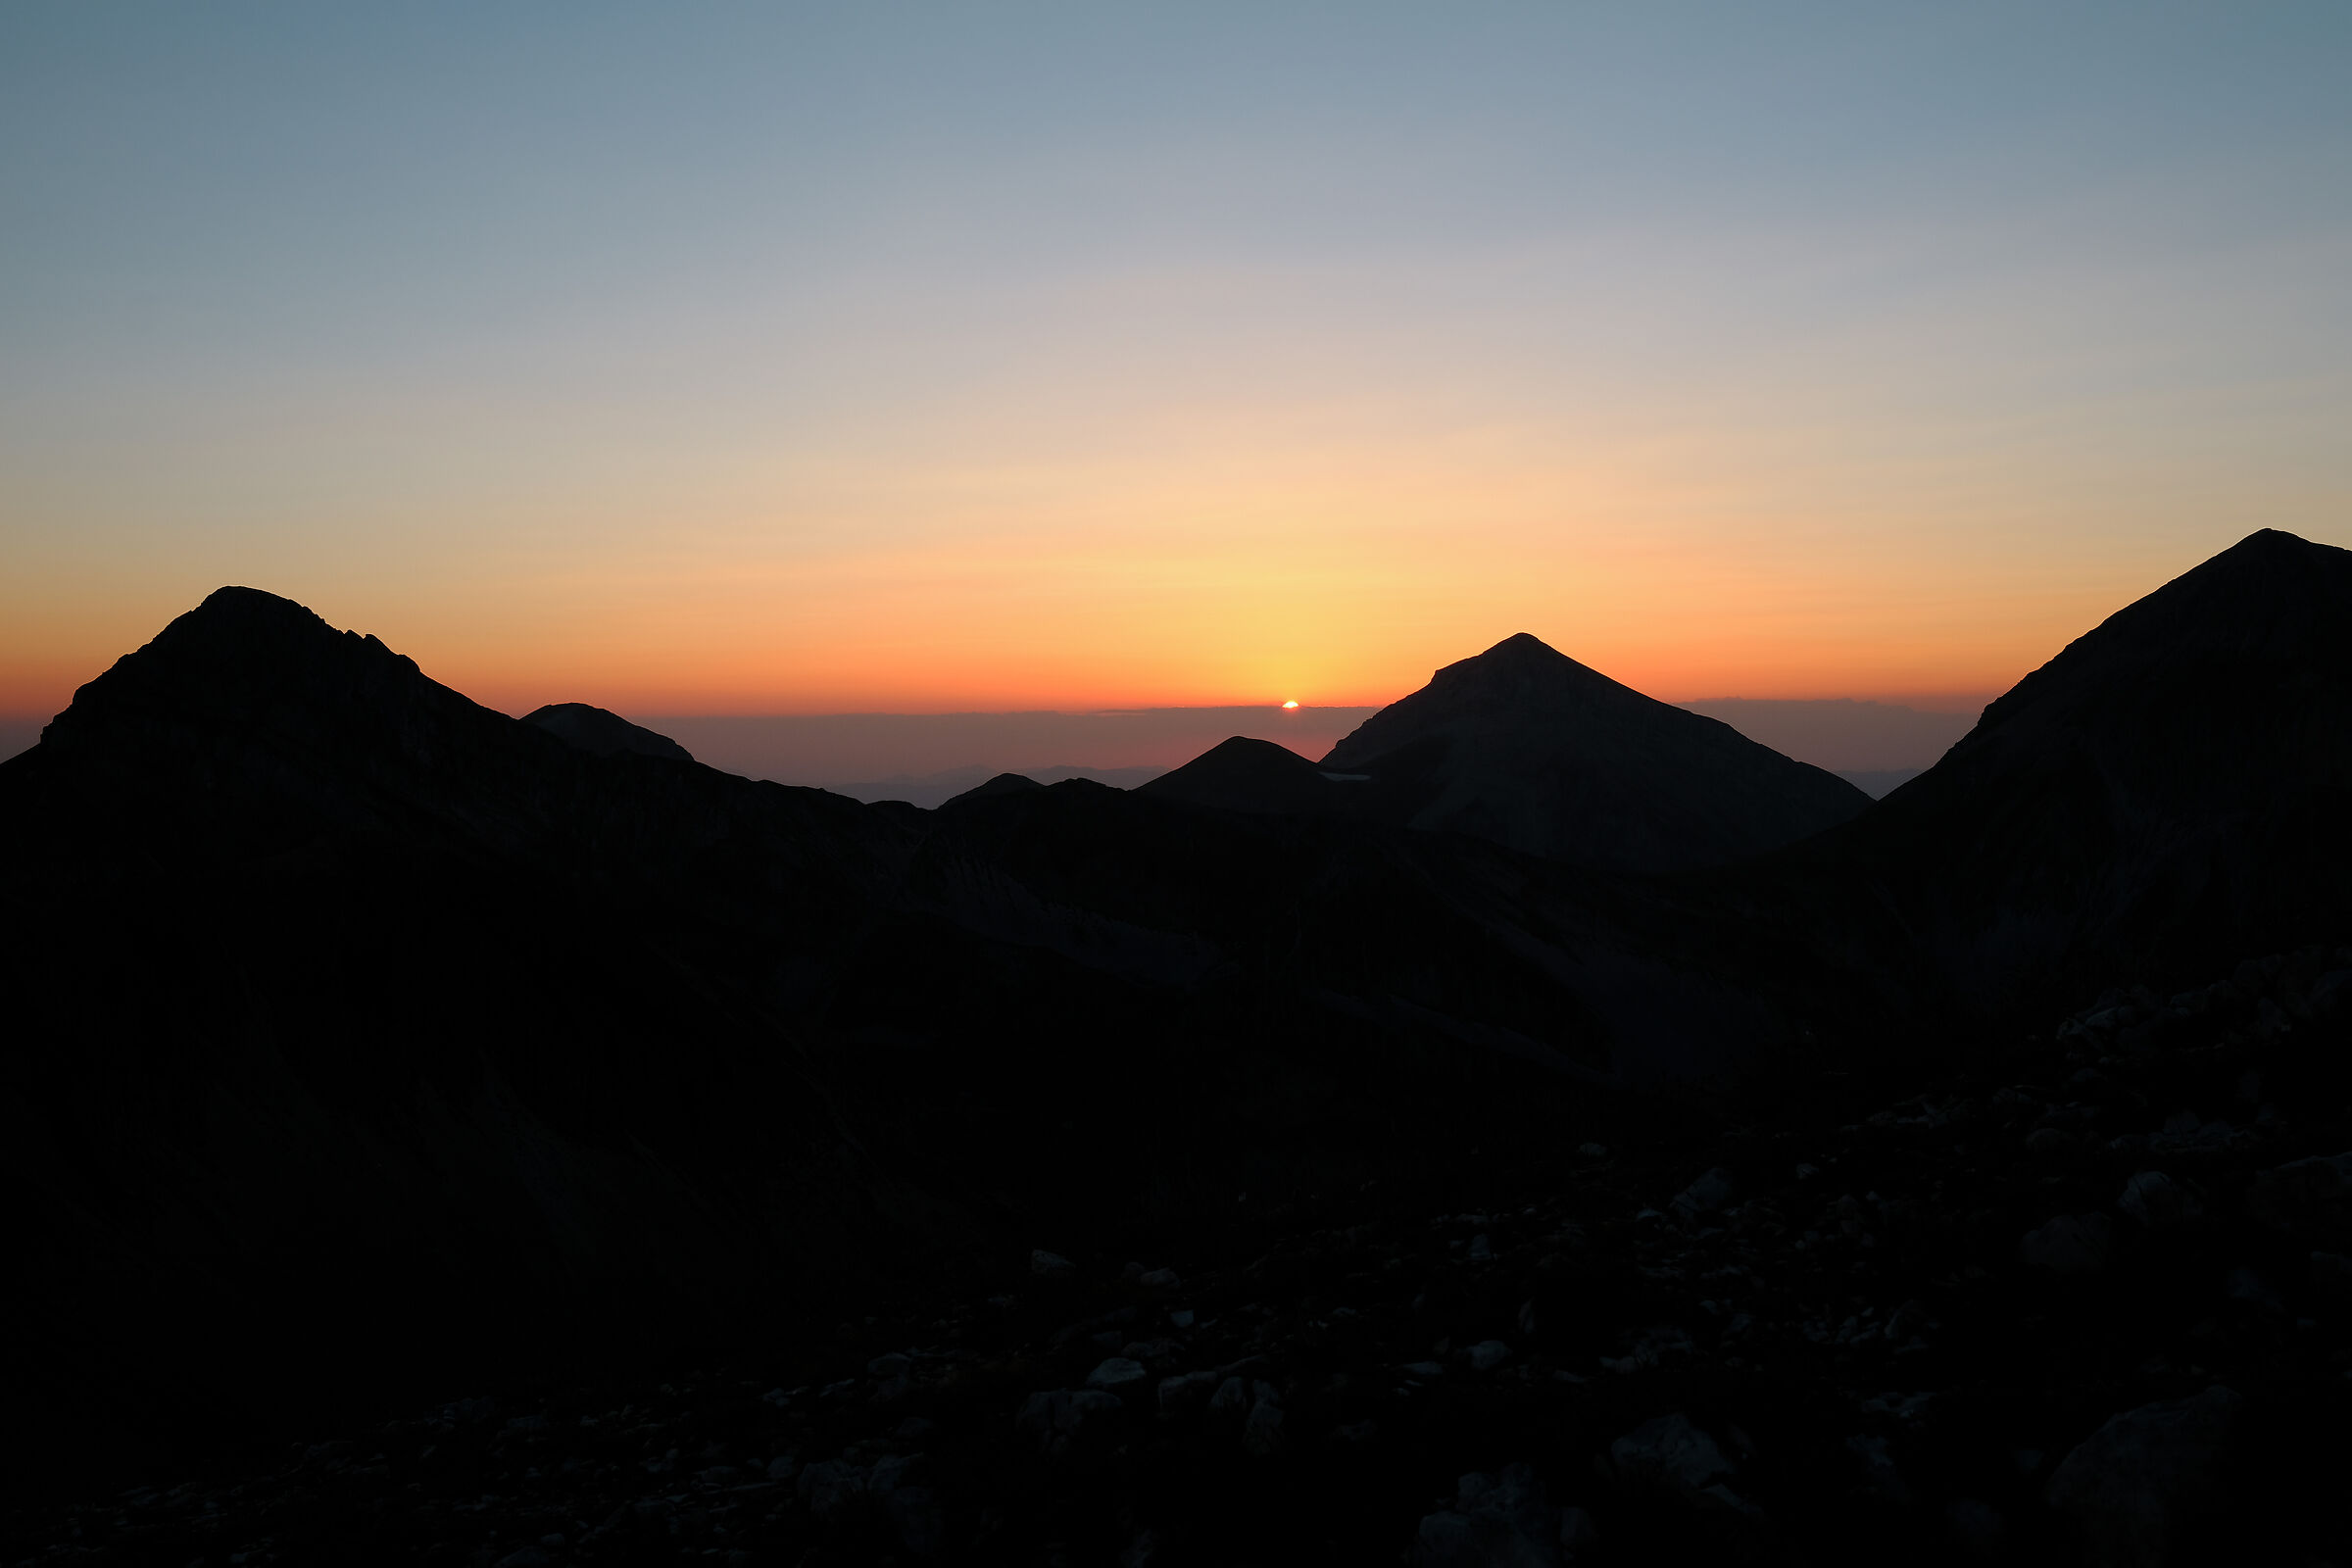 Sunset at 2912 meters...